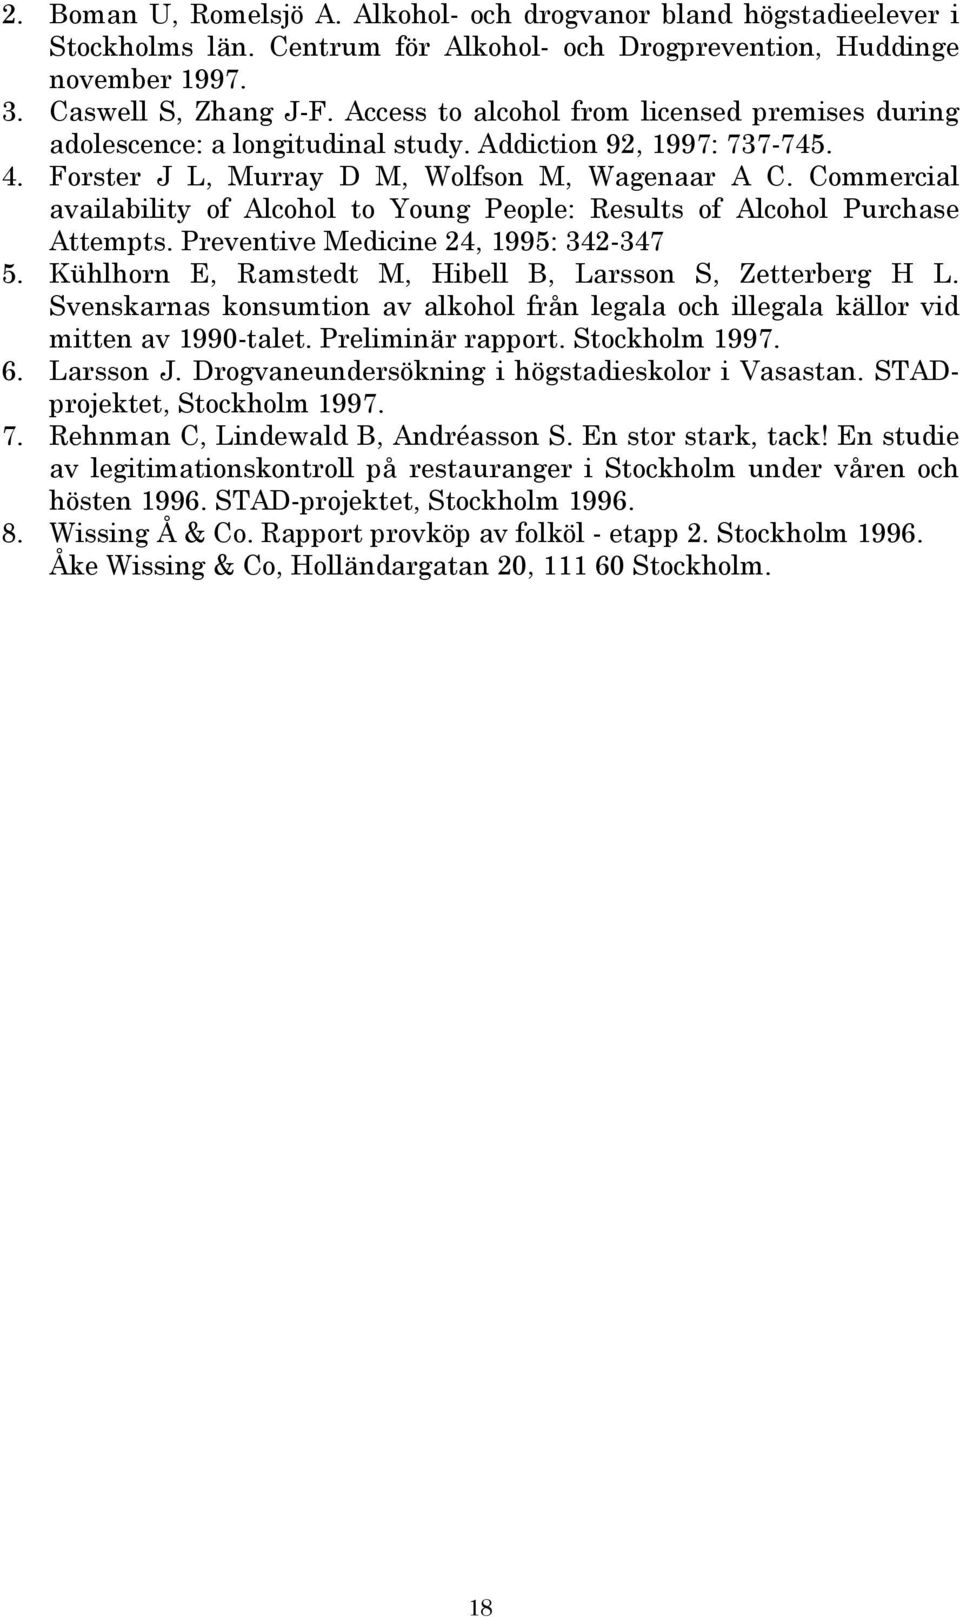 Commercial availability of Alcohol to Young People: Results of Alcohol Purchase Attempts. Preventive Medicine 24, 1995: 342-347 5. Kühlhorn E, Ramstedt M, Hibell B, Larsson S, Zetterberg H L.